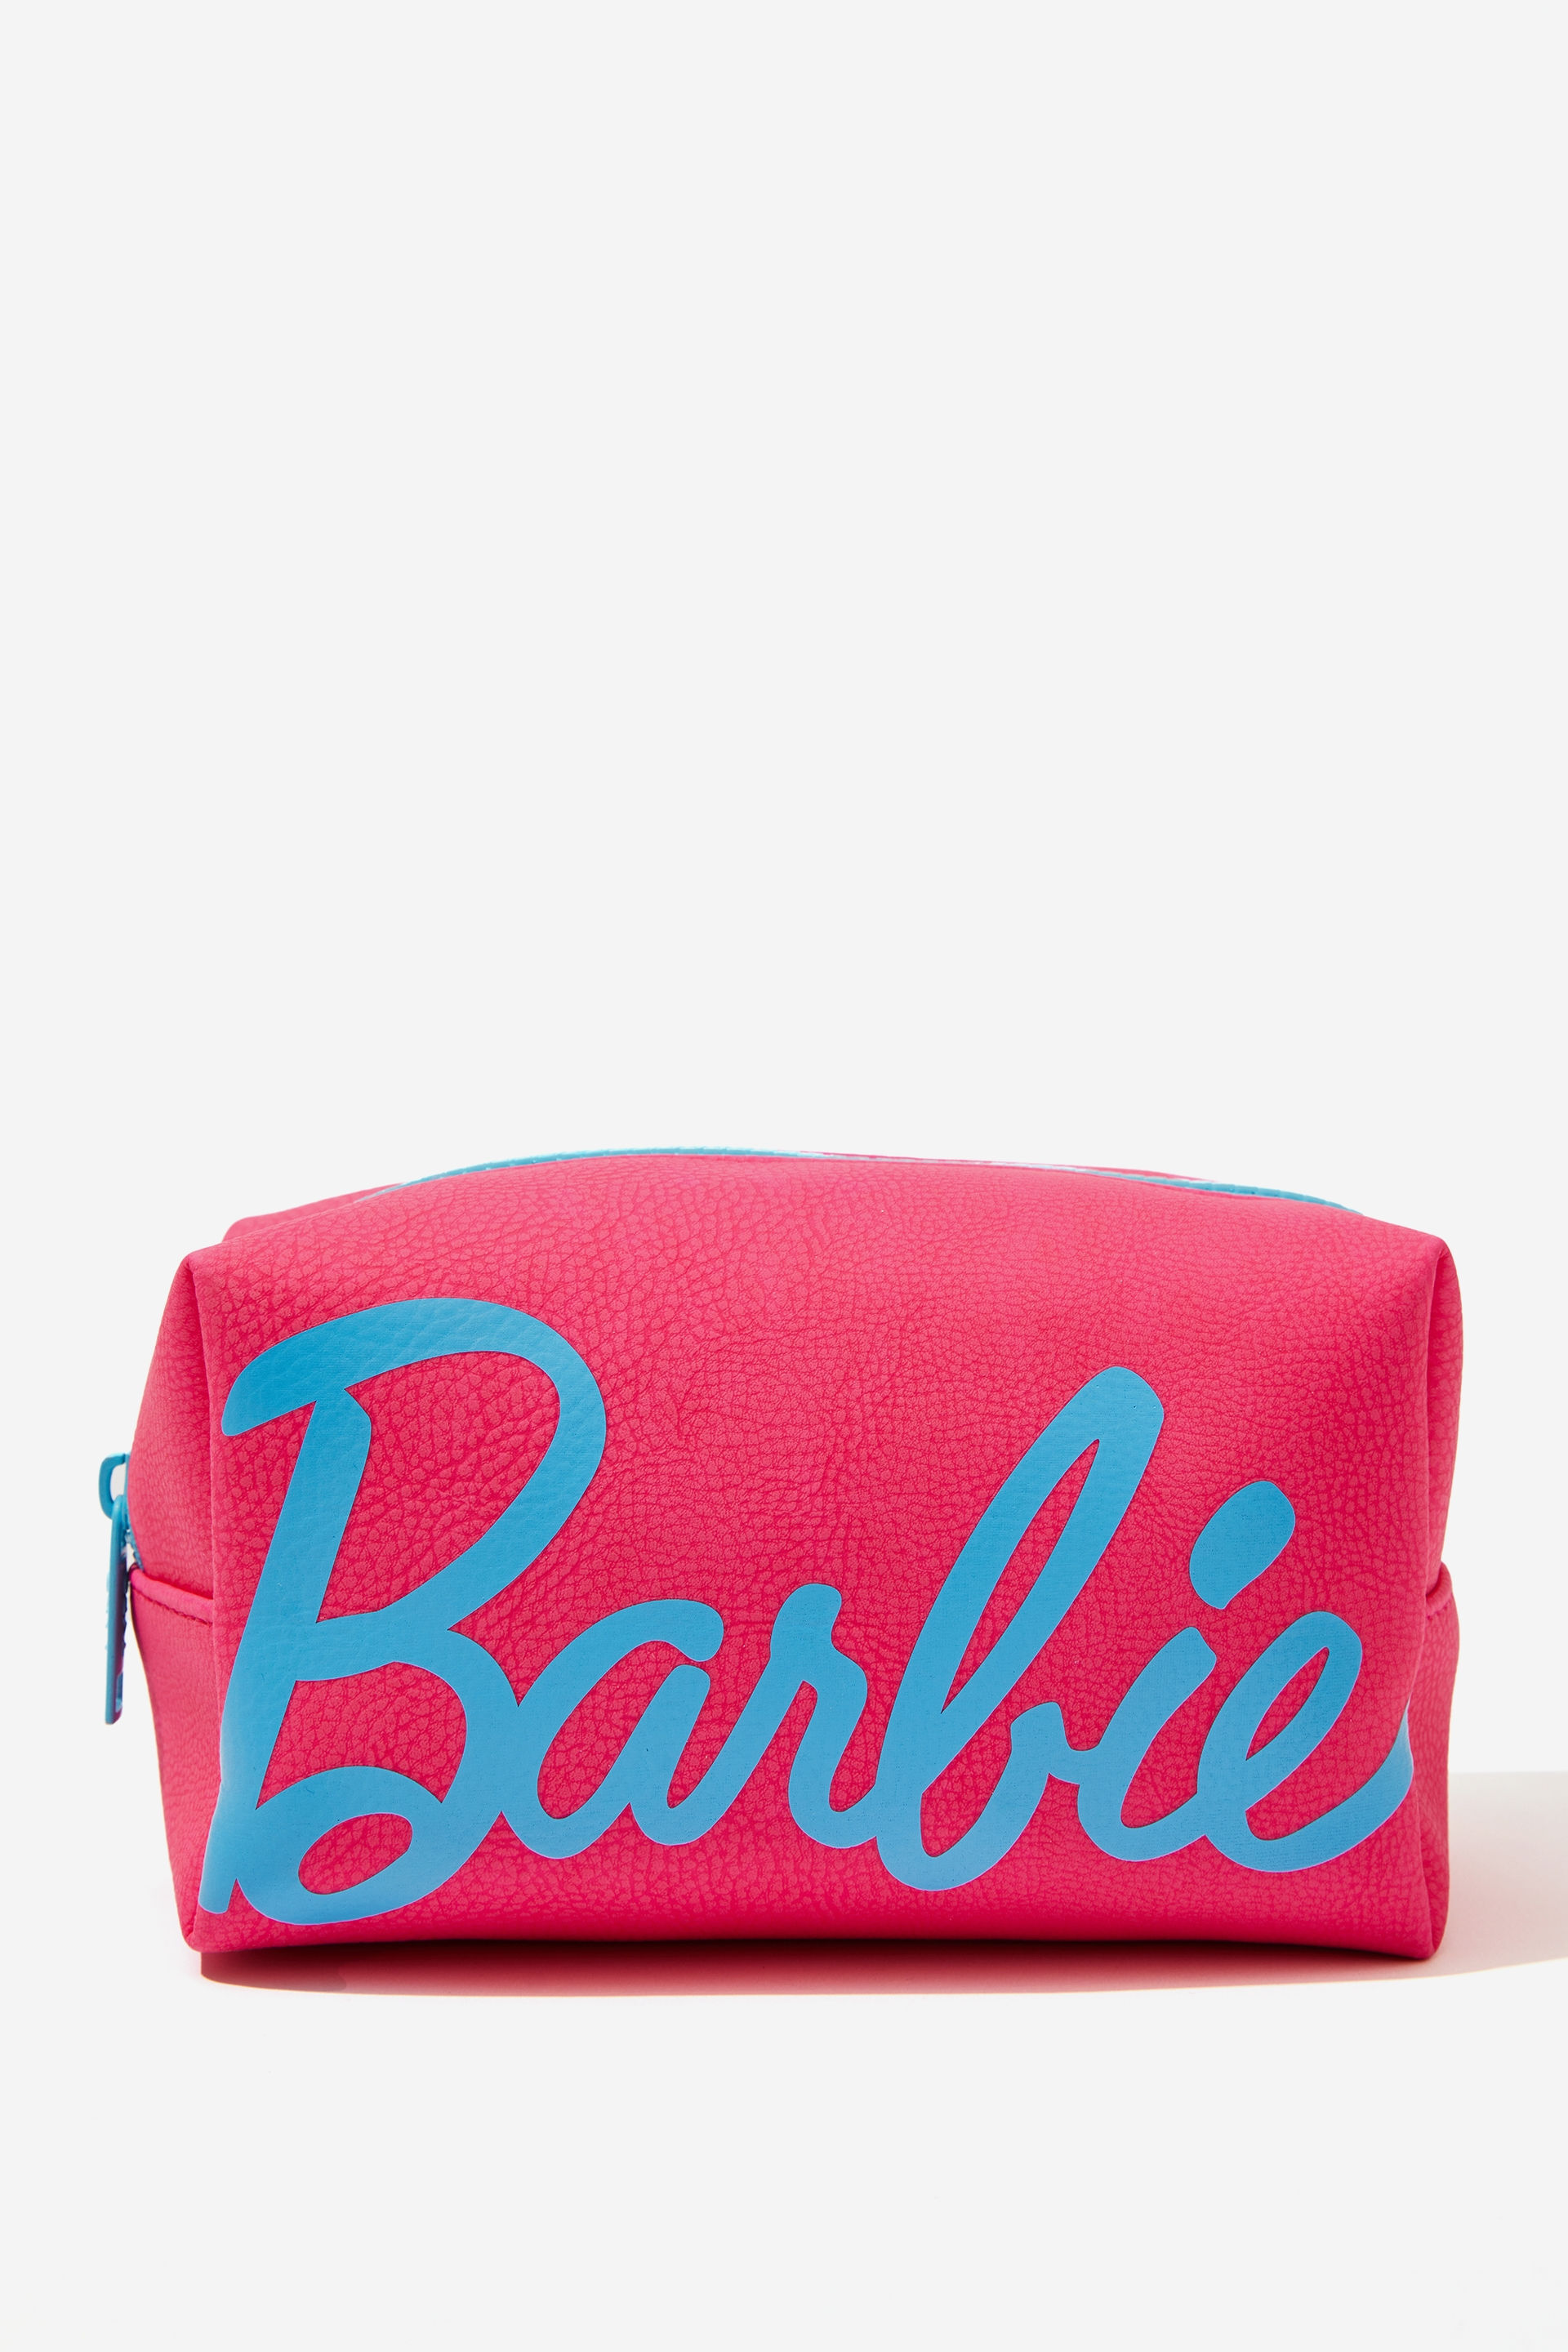 Looking for Barbie brand purse not just color. | Barbie, Purses, Bags